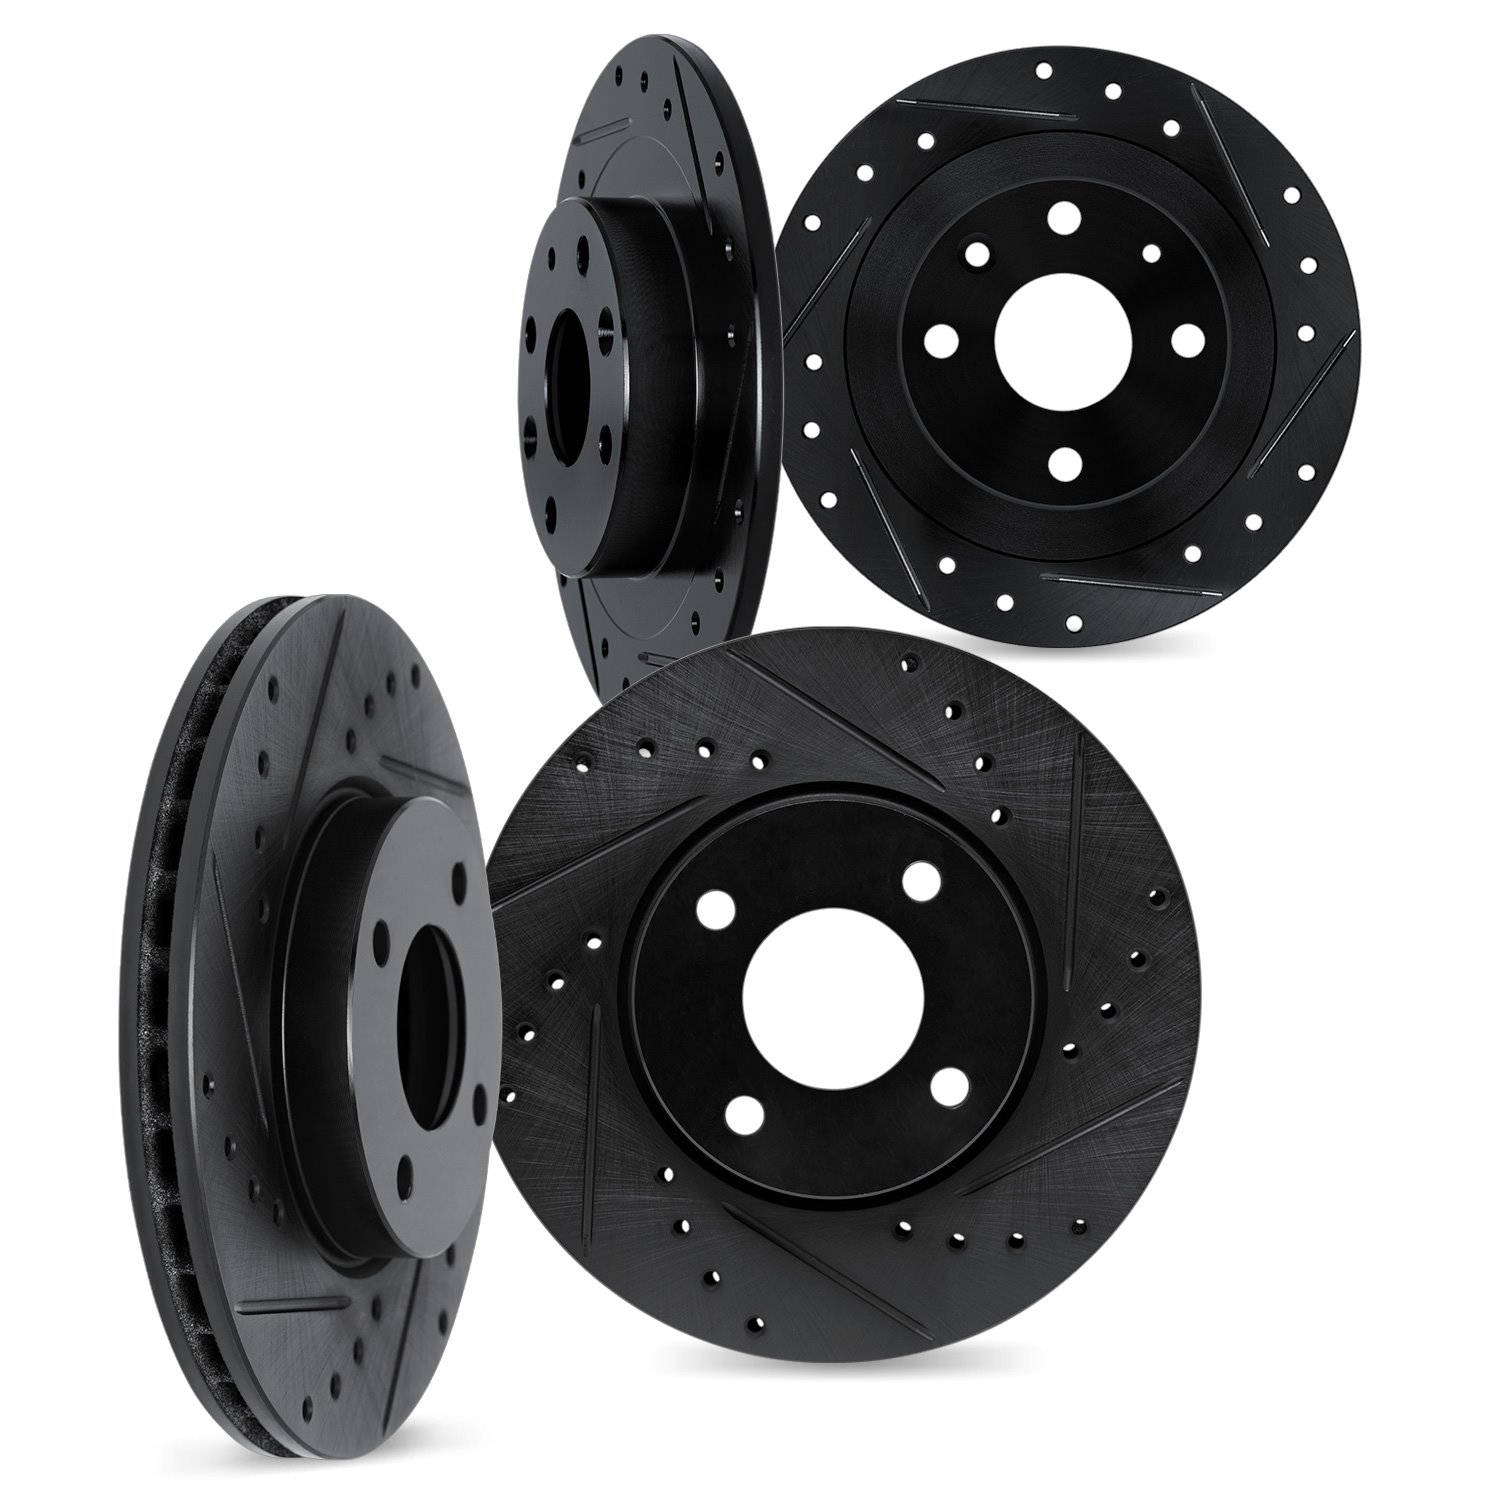 8004-67005 Drilled/Slotted Brake Rotors [Black], 1993-2006 Infiniti/Nissan, Position: Front and Rear